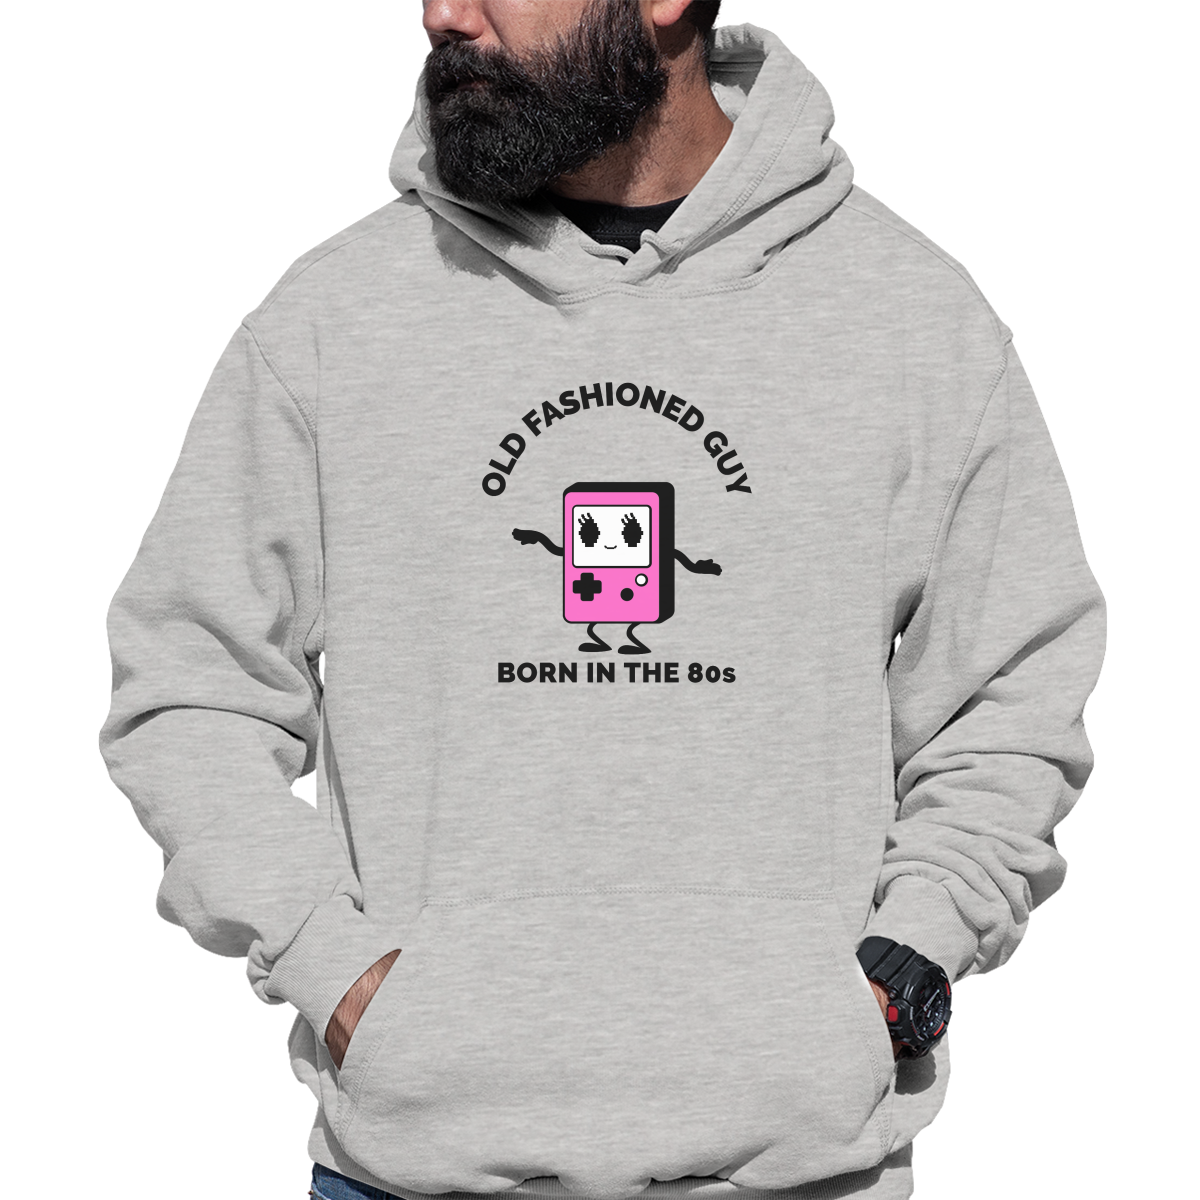 Old Fashioned Guy Unisex Hoodie | Gray